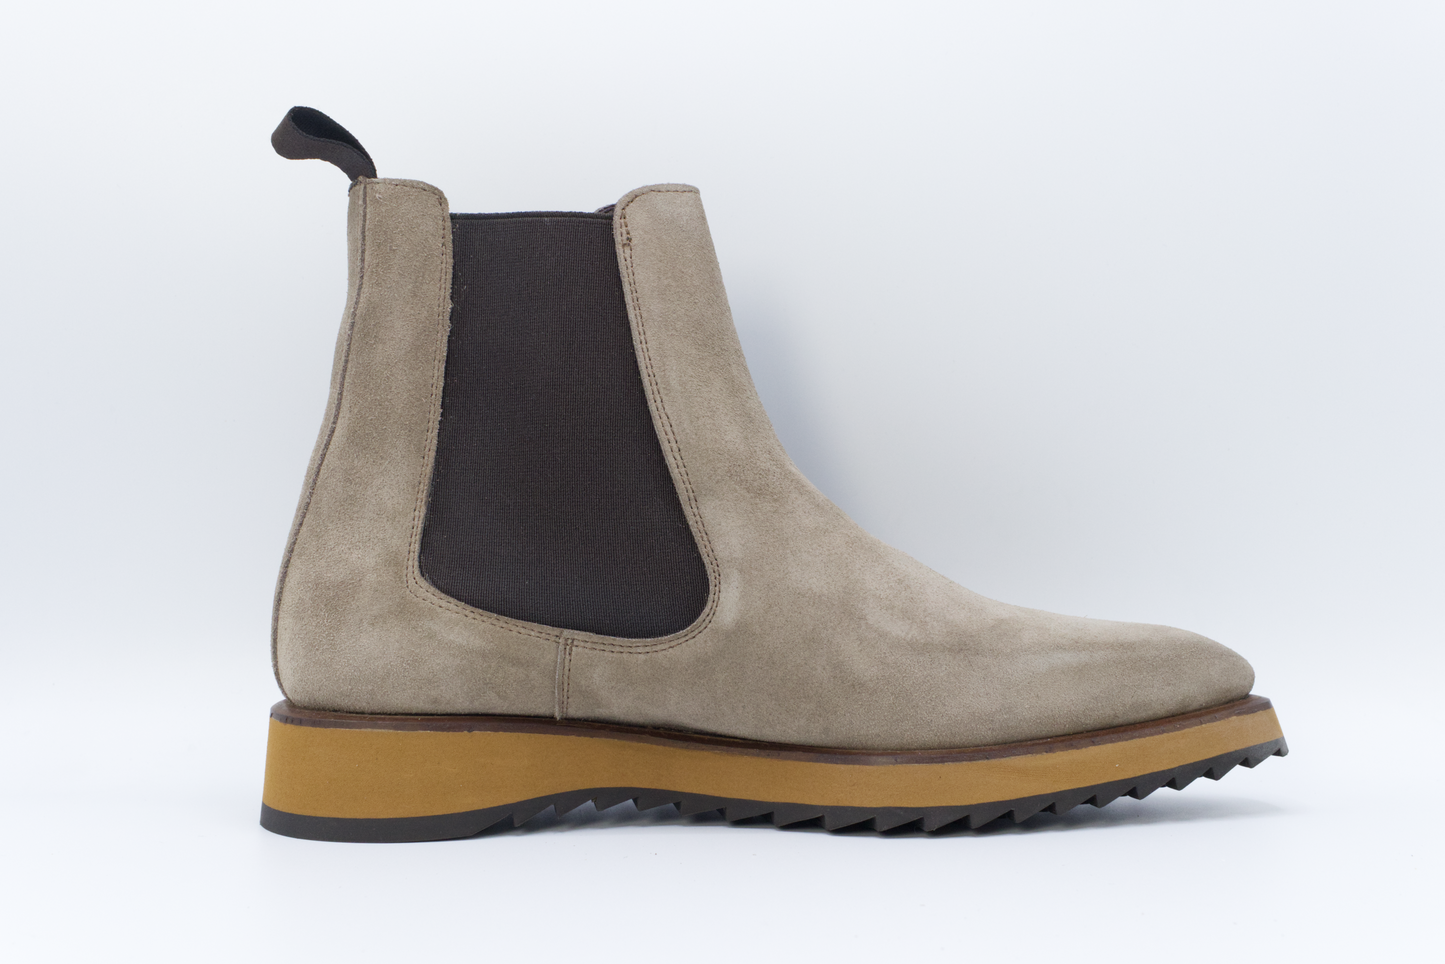 Shop Handmade Italian Men's Suede Chelsea Boot in Dove Grey or browse our range of hand-made Italian sneakers for men in leather or suede. We deliver to the USA and Canada & offer multiple payment plans as well as accept multiple safe & secure payment methods. \With exceptional quality and comfort, our boots are perfect for any occasion.  Duedi03